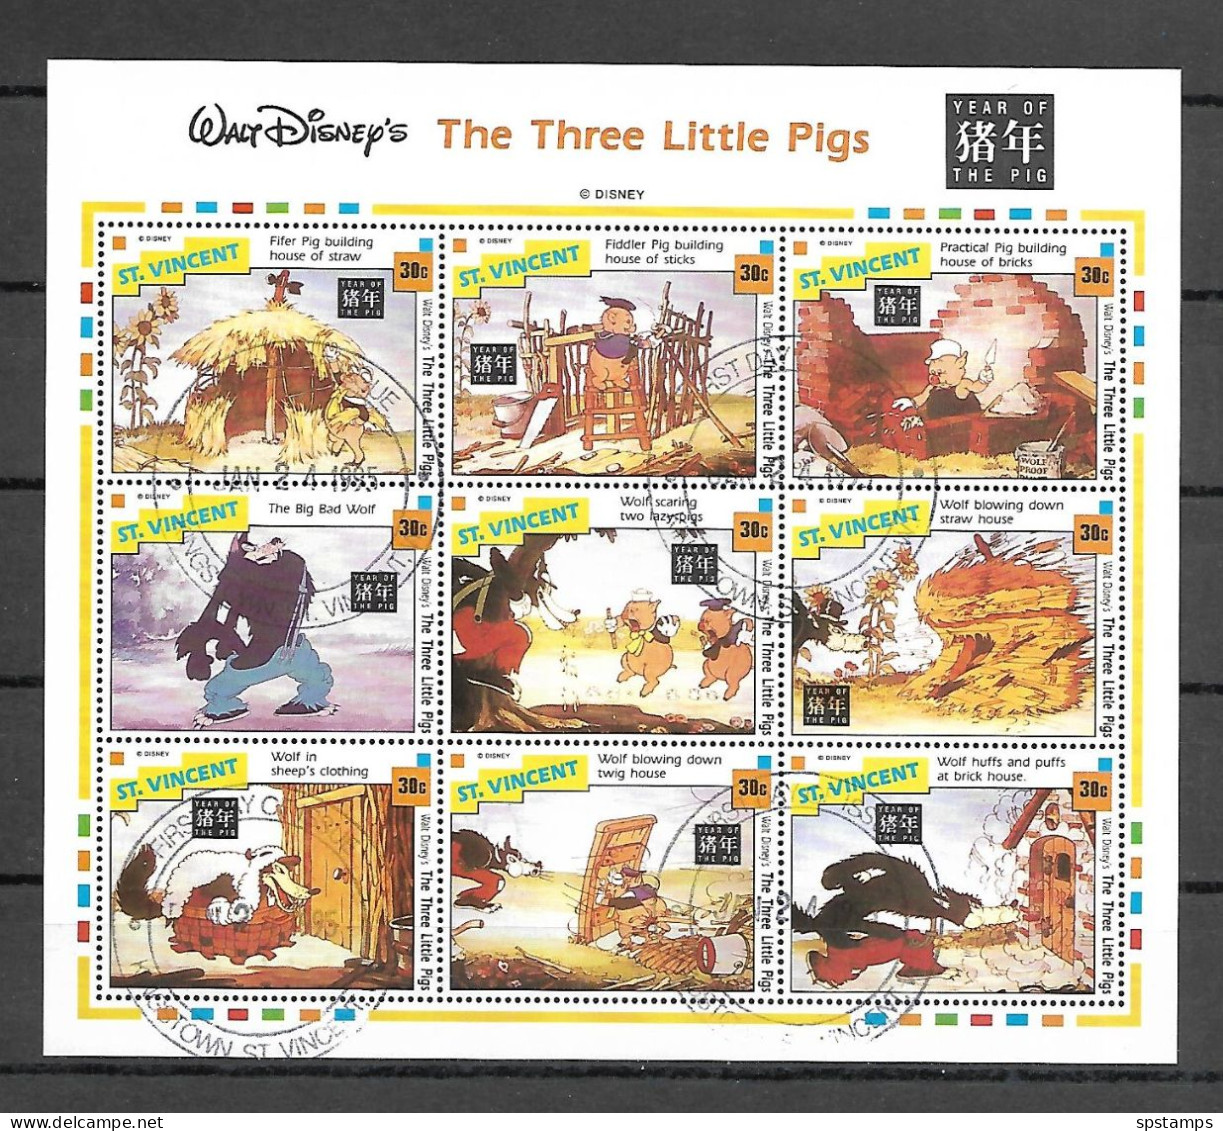 Disney St Vincent 1995 The Three Little Pigs - Year Of The Pig Sheetlet USED - CTO - Disney